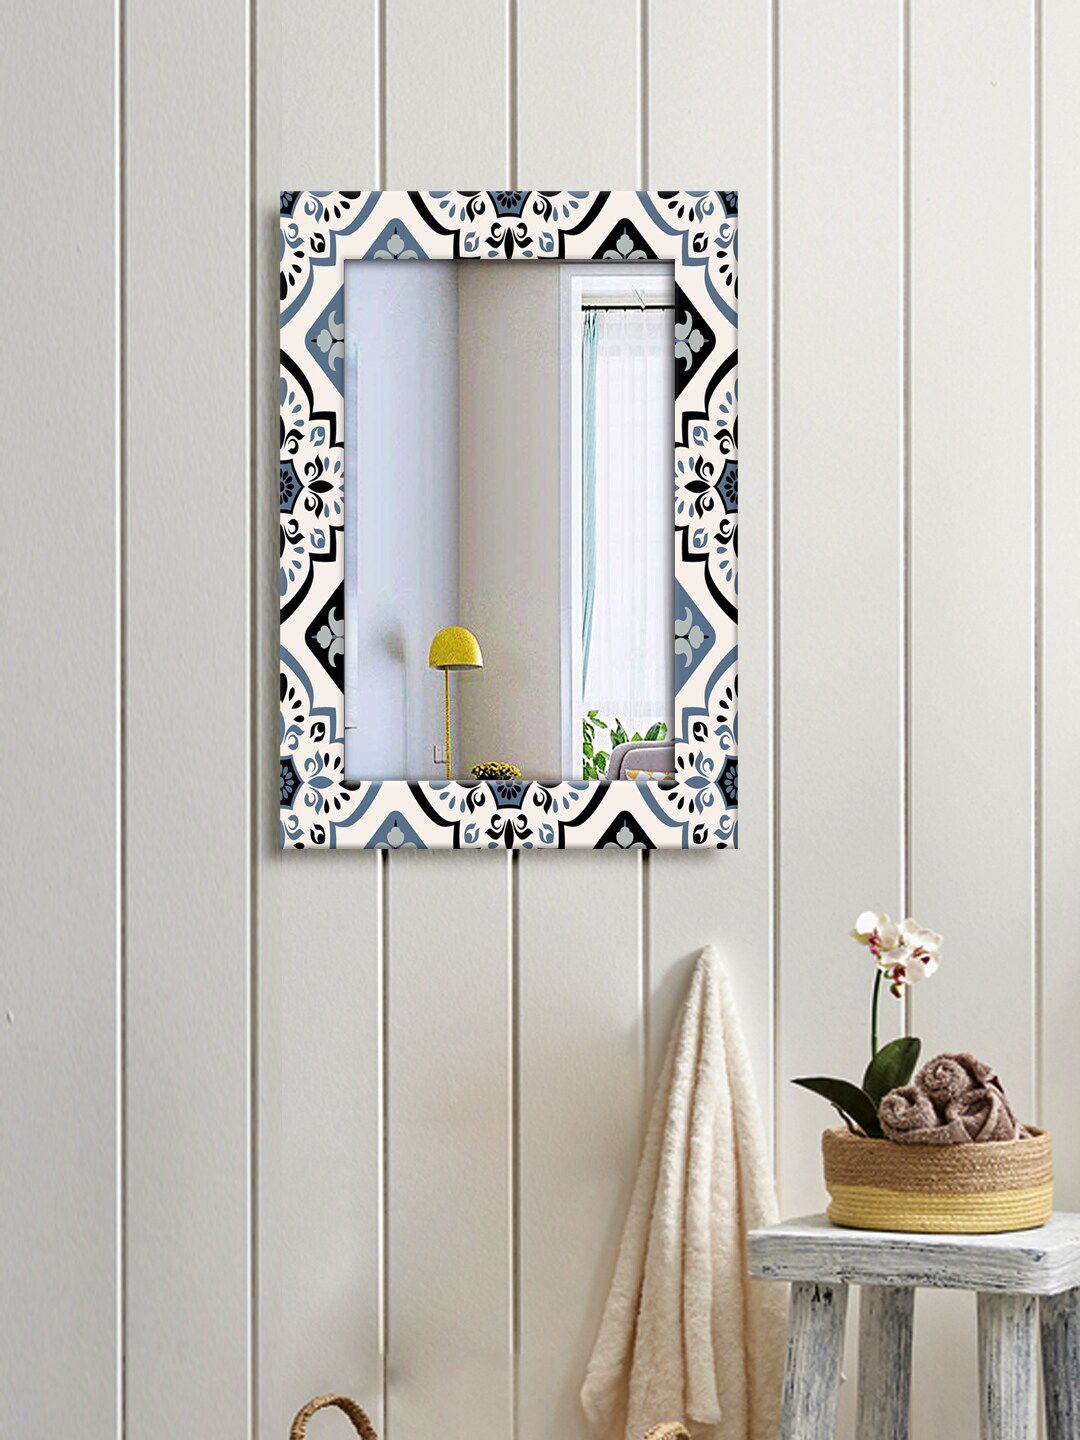 999Store Off White & Black Decorative Flower And Tree Wall Hanging Mirror Price in India